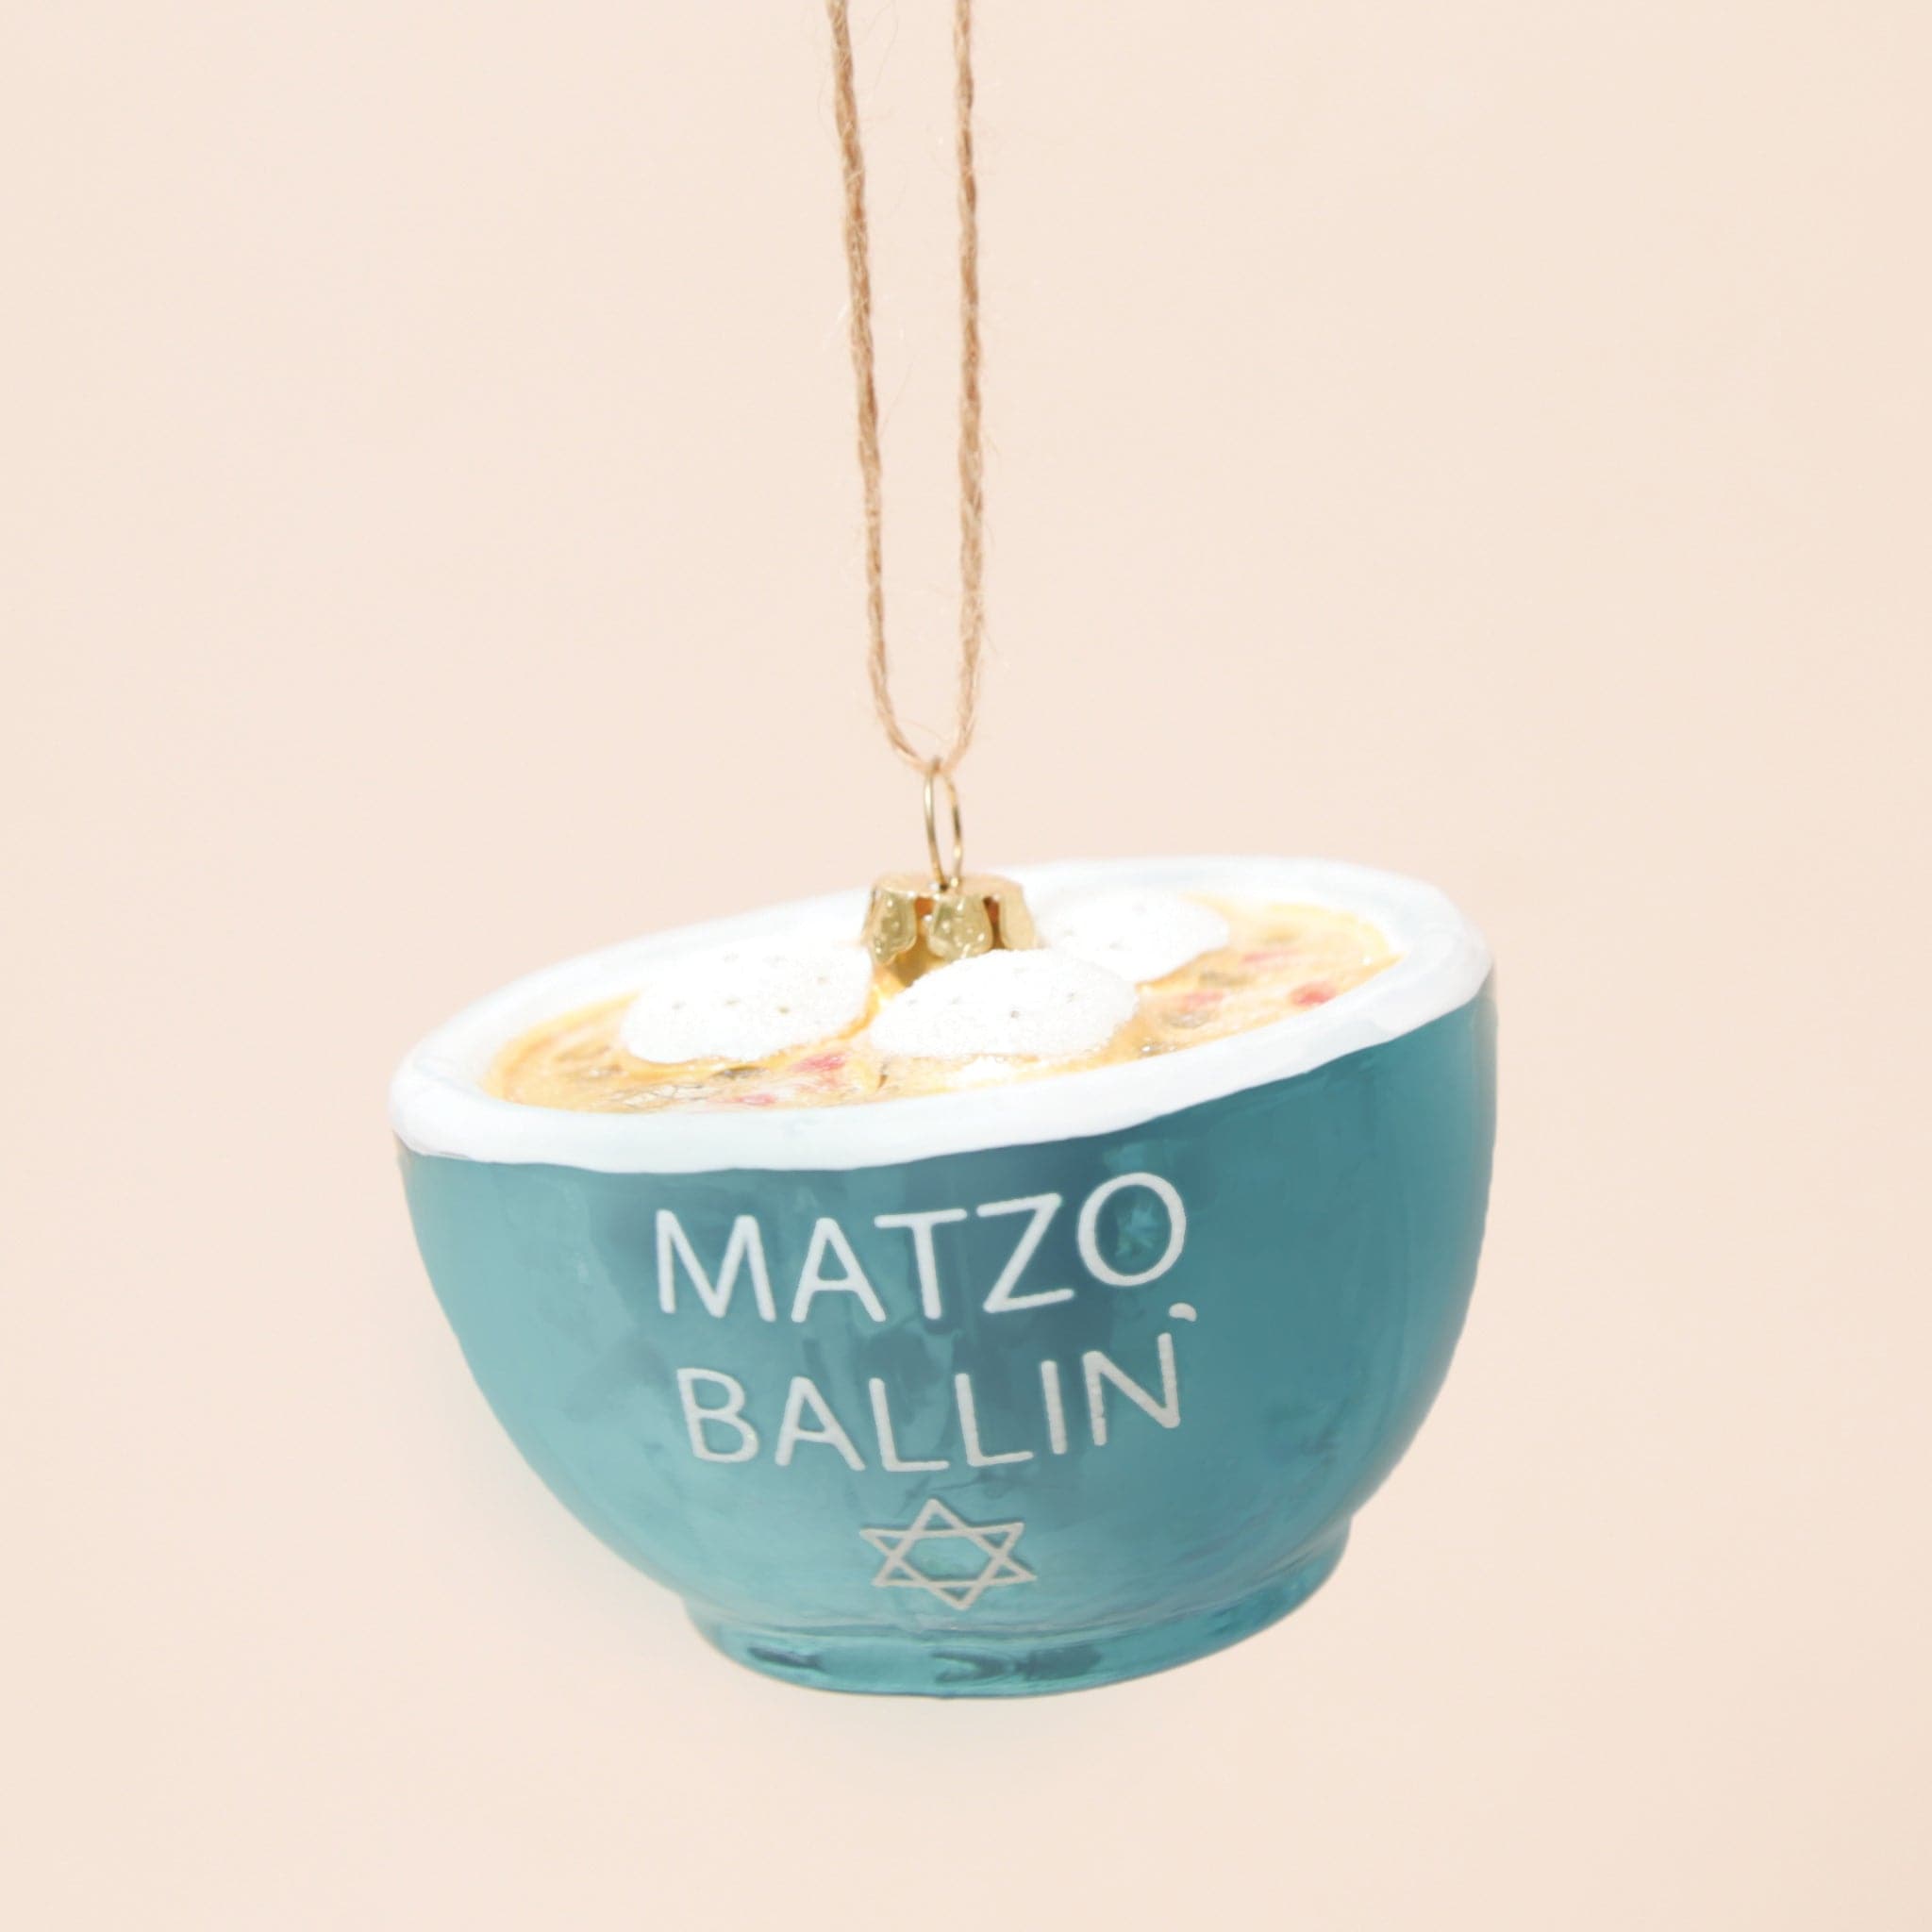 A glass matzo ball soup ornament with dumplings and a blue bowl that says "matzo ballin" in white text.